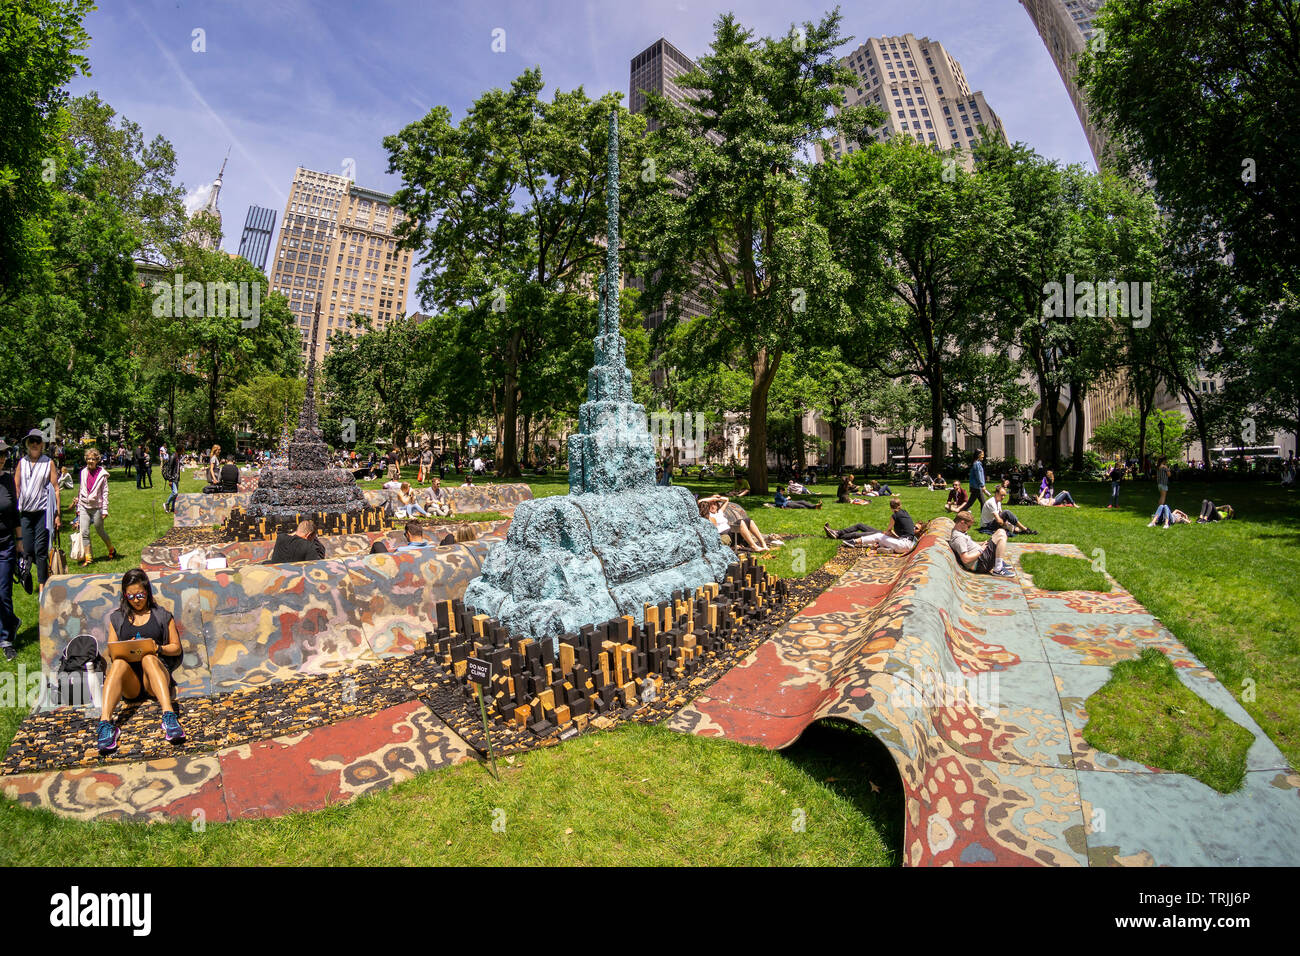 Visitors to Madison Square Park enjoy the warm weather by lounging on the sculpture “City in the Grass” by the artist Leonardo Drew on a warm Tuesday, June 4, 2019. The monumental public art commission presents a stylized cityscape over 100 feet long and provides an experiential activity, relaxing and lounging. The work will be on view and available for seating until December 15, 2019. (© Richard B. Levine) Stock Photo